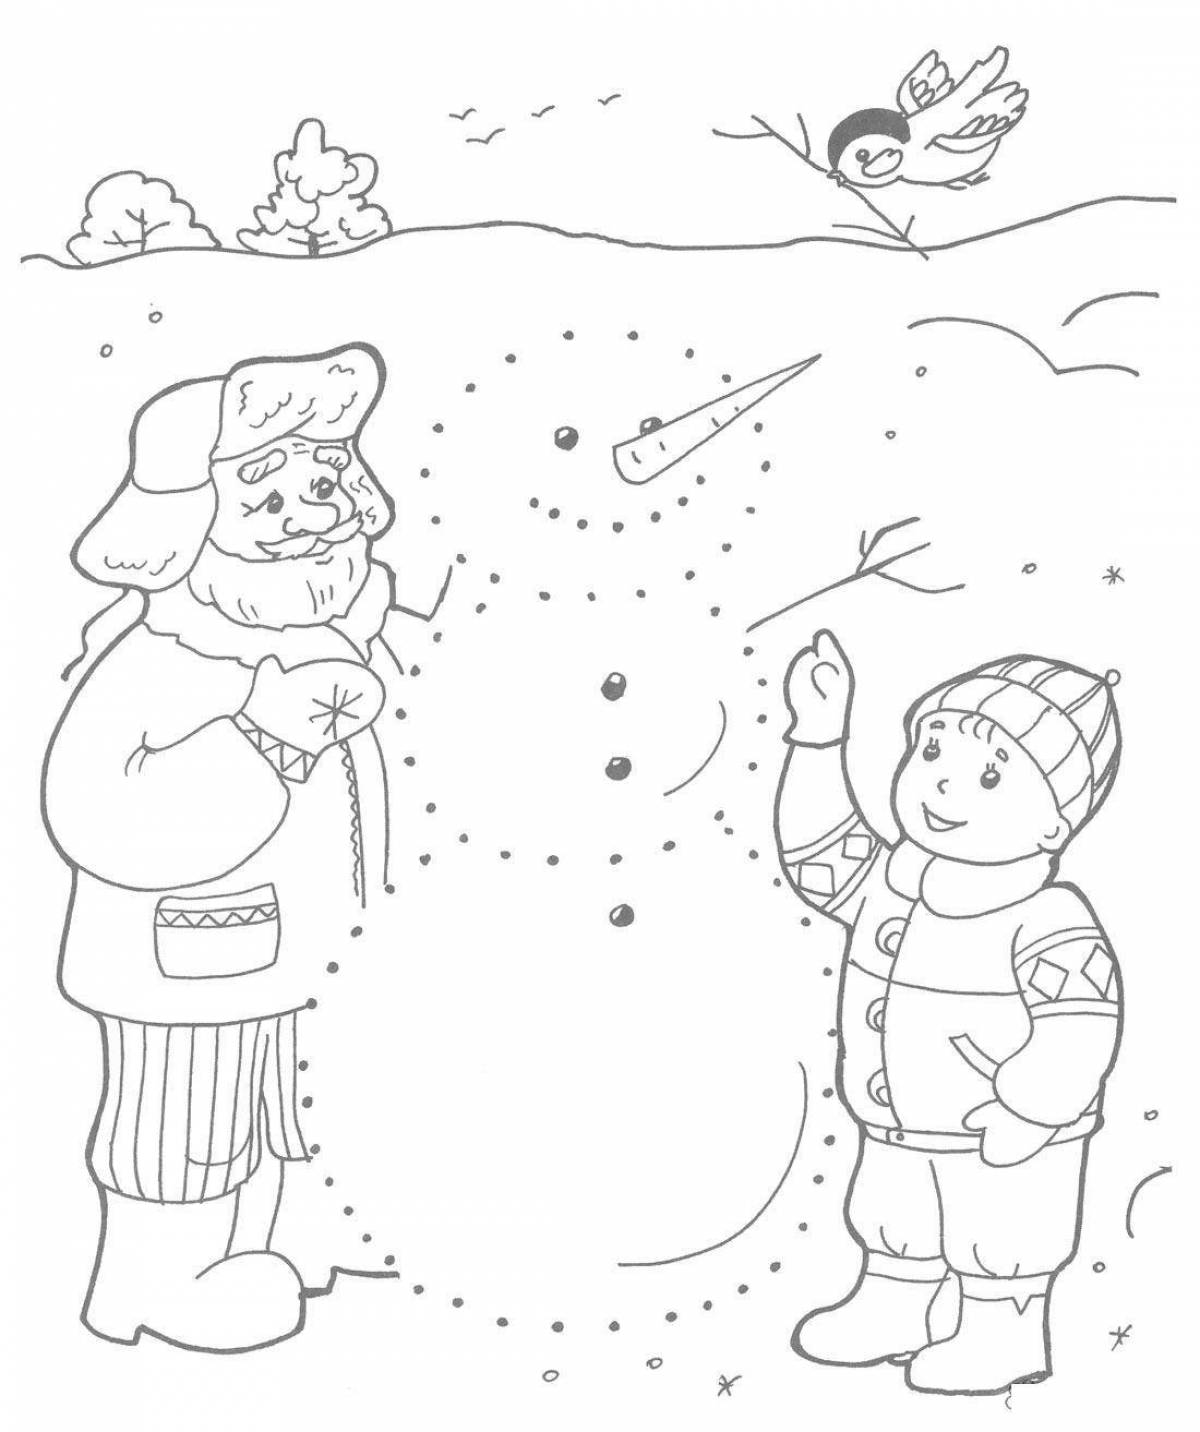 Large winter coloring book for children 3-4 years old